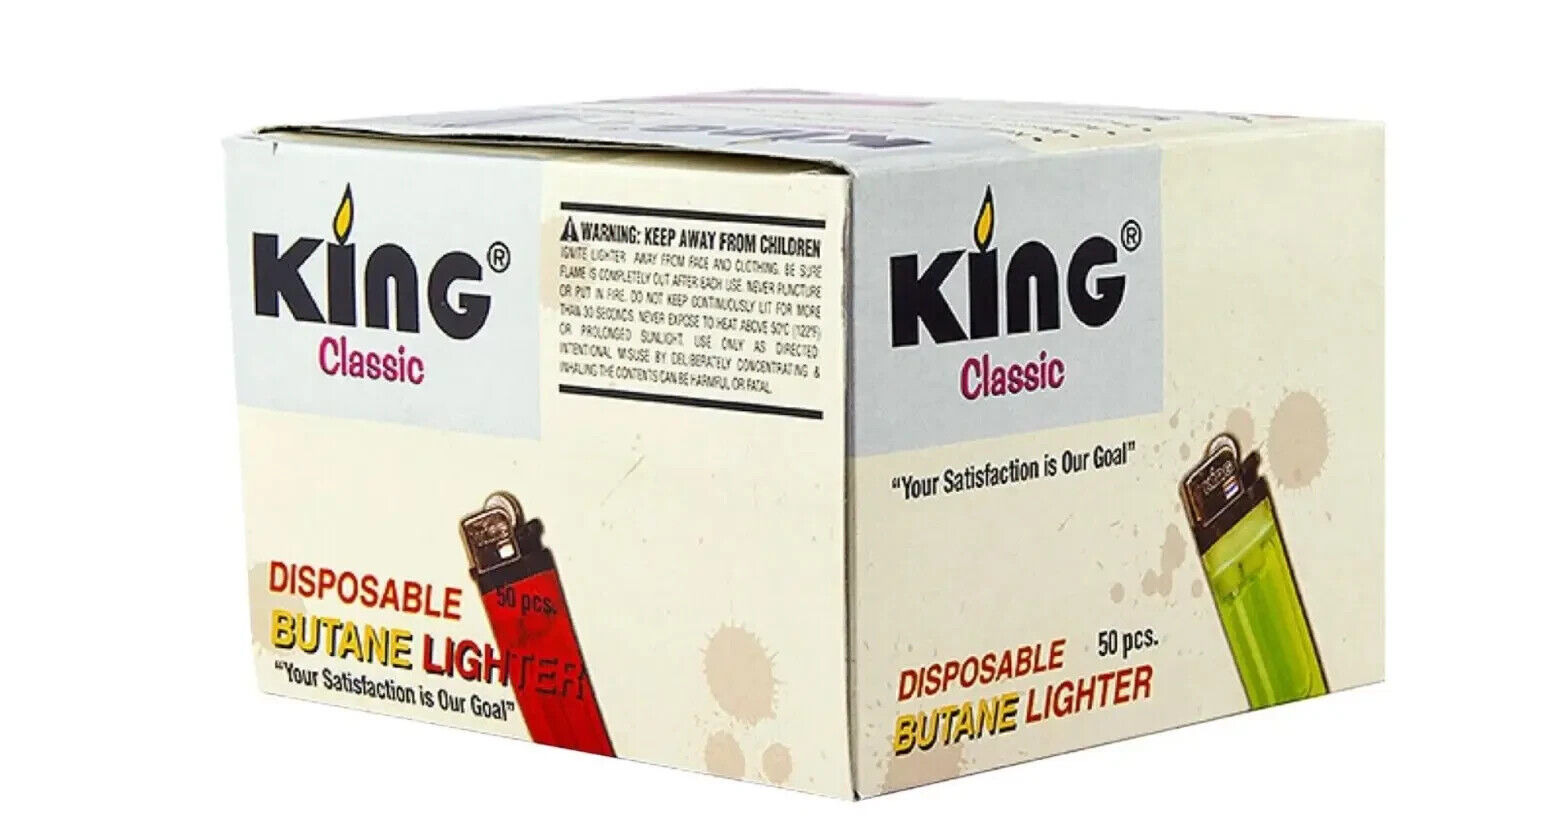 King Classic Disposable Butane Lighters Assorted Colors (50 Count) 1 Pack